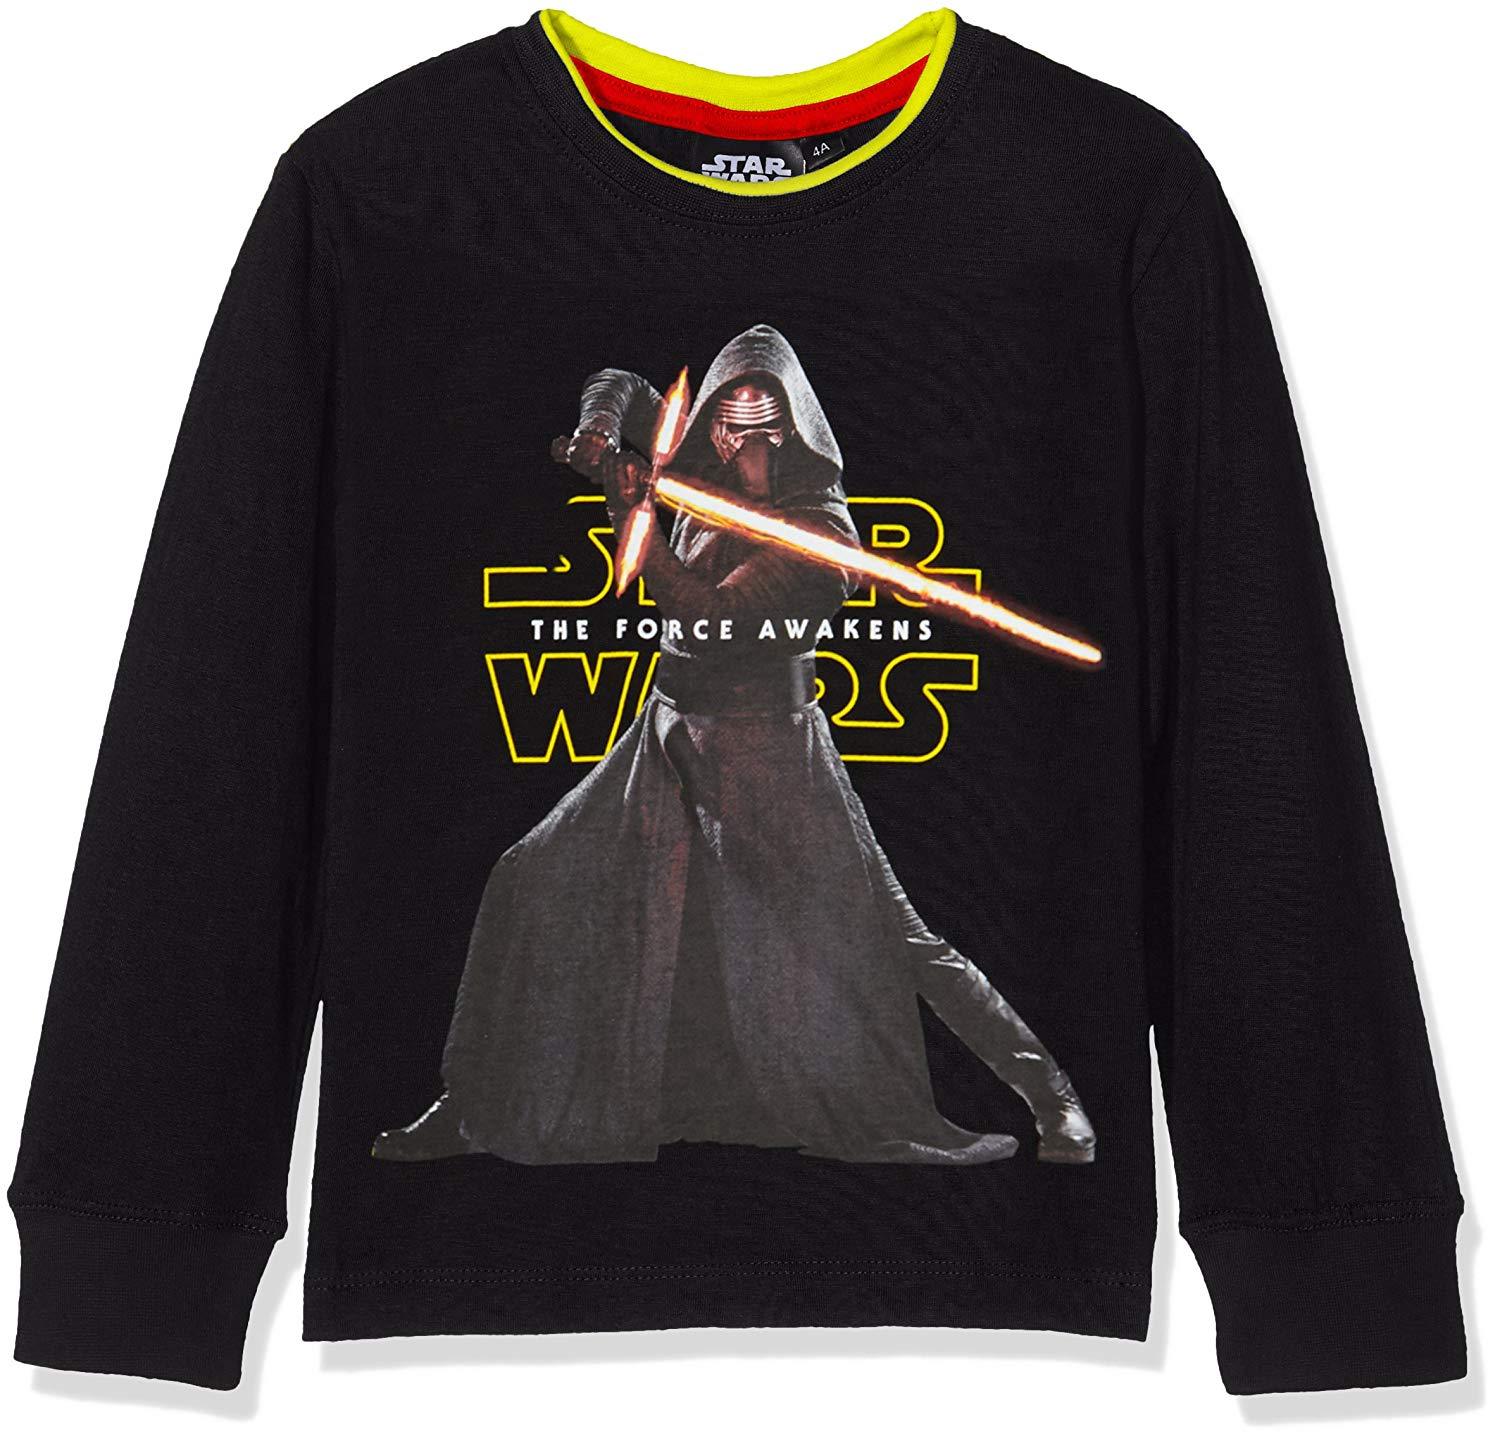 Star Wars The Force Awakens Boys Black Longsleeve Top - Stockpoint Apparel Outlet